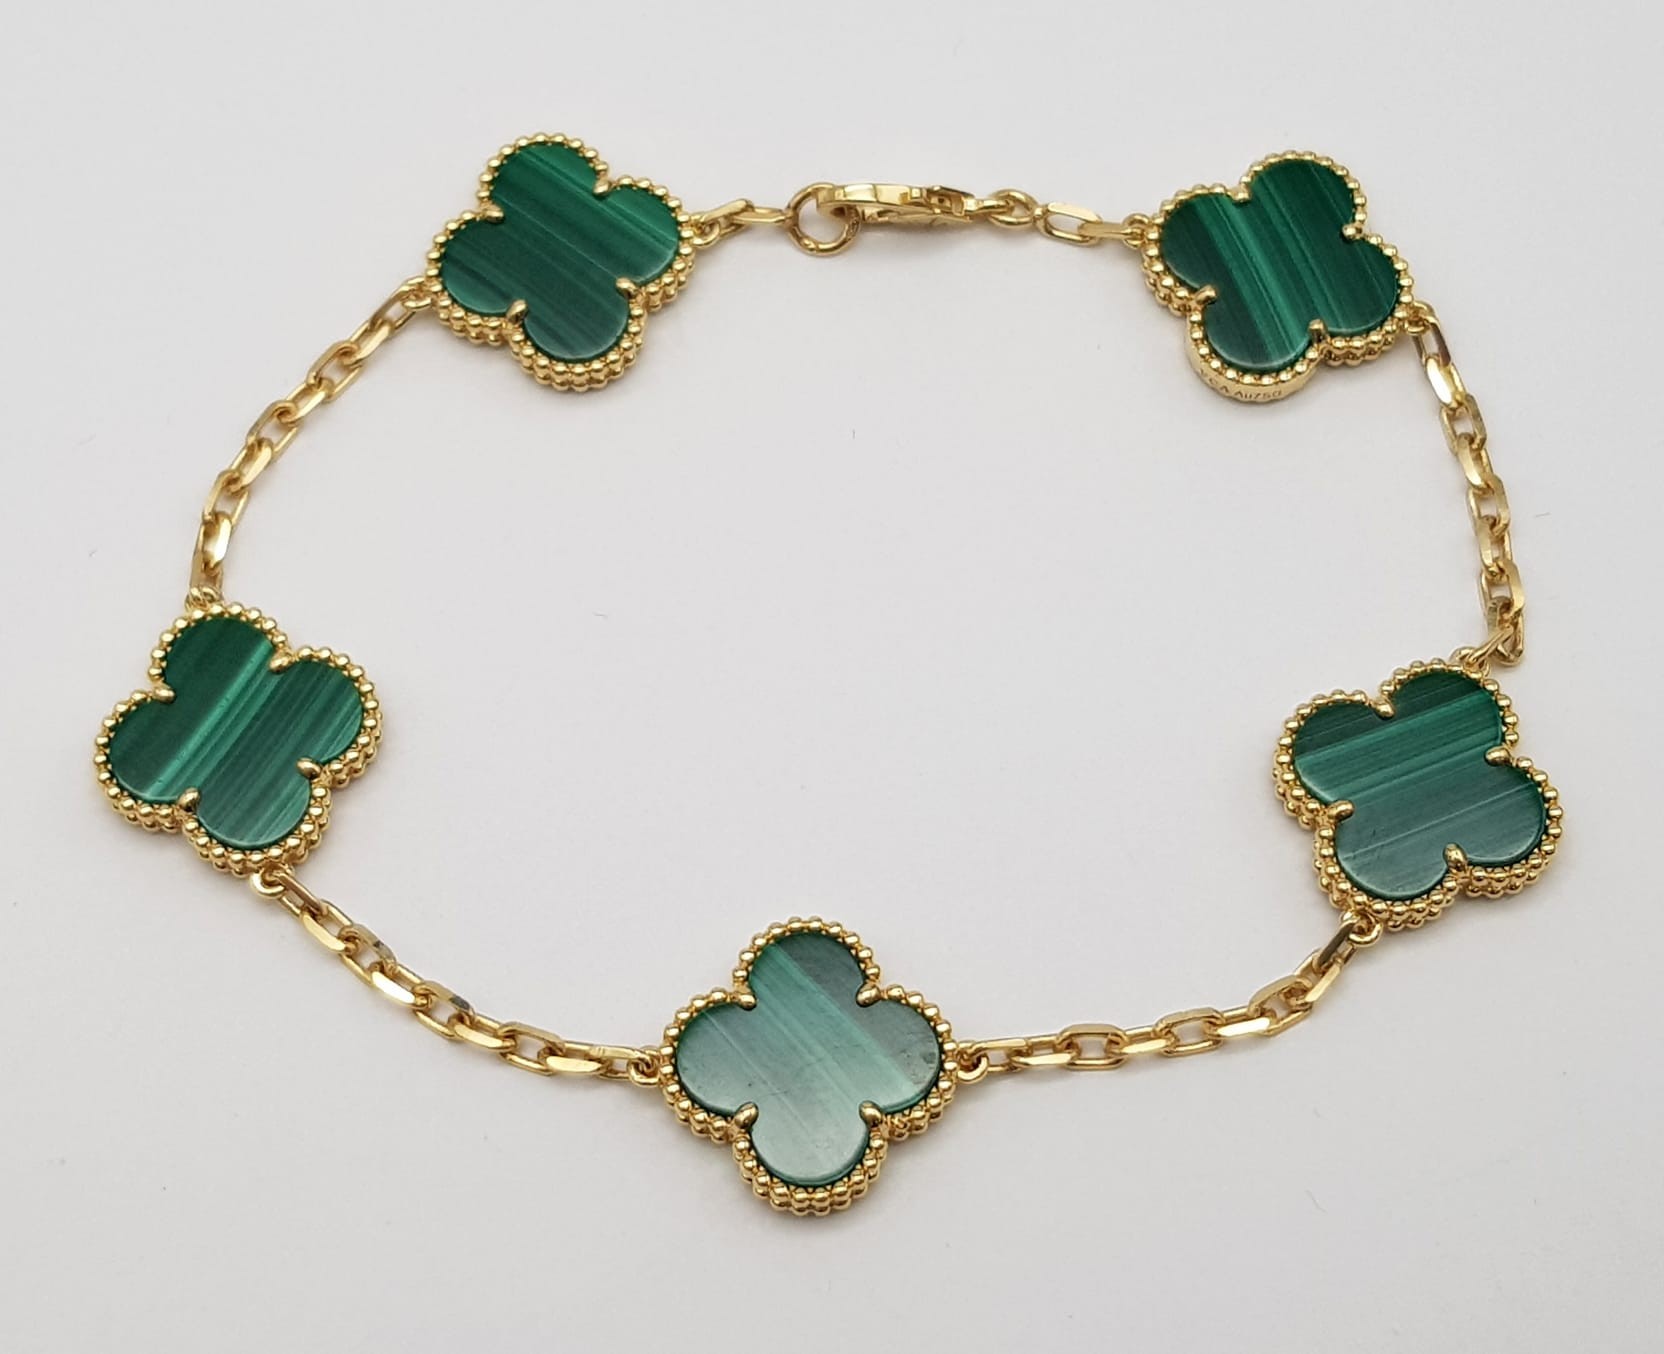 A Van Cleef and Arpels Alhambra bracelet with 5 motifs - 18ct yellow gold with malachite inserts. - Image 7 of 7